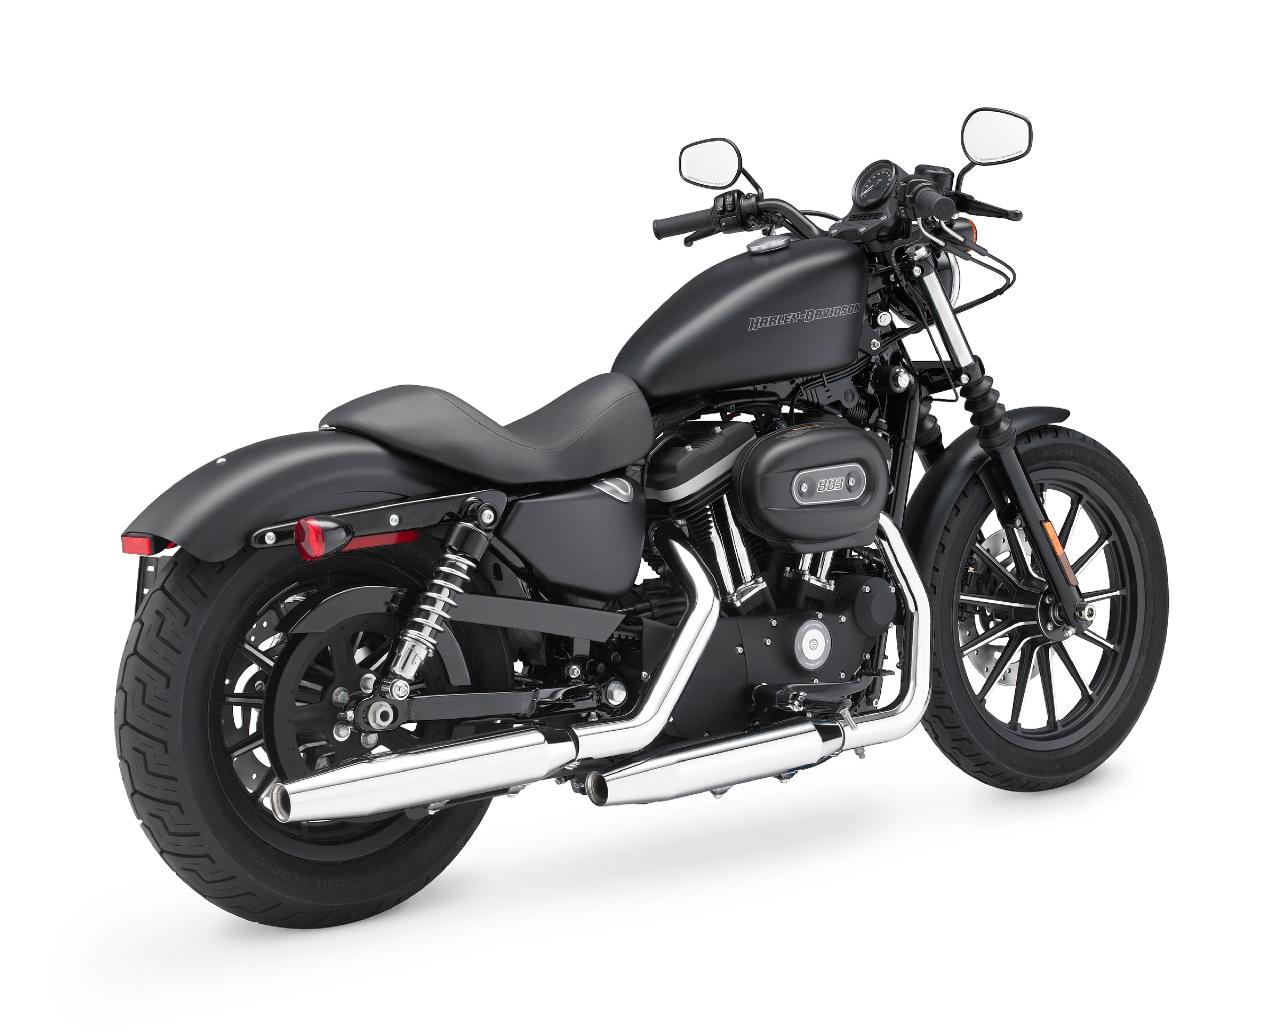 Harley Davidson IRON 883 India Specifications, Features, Price